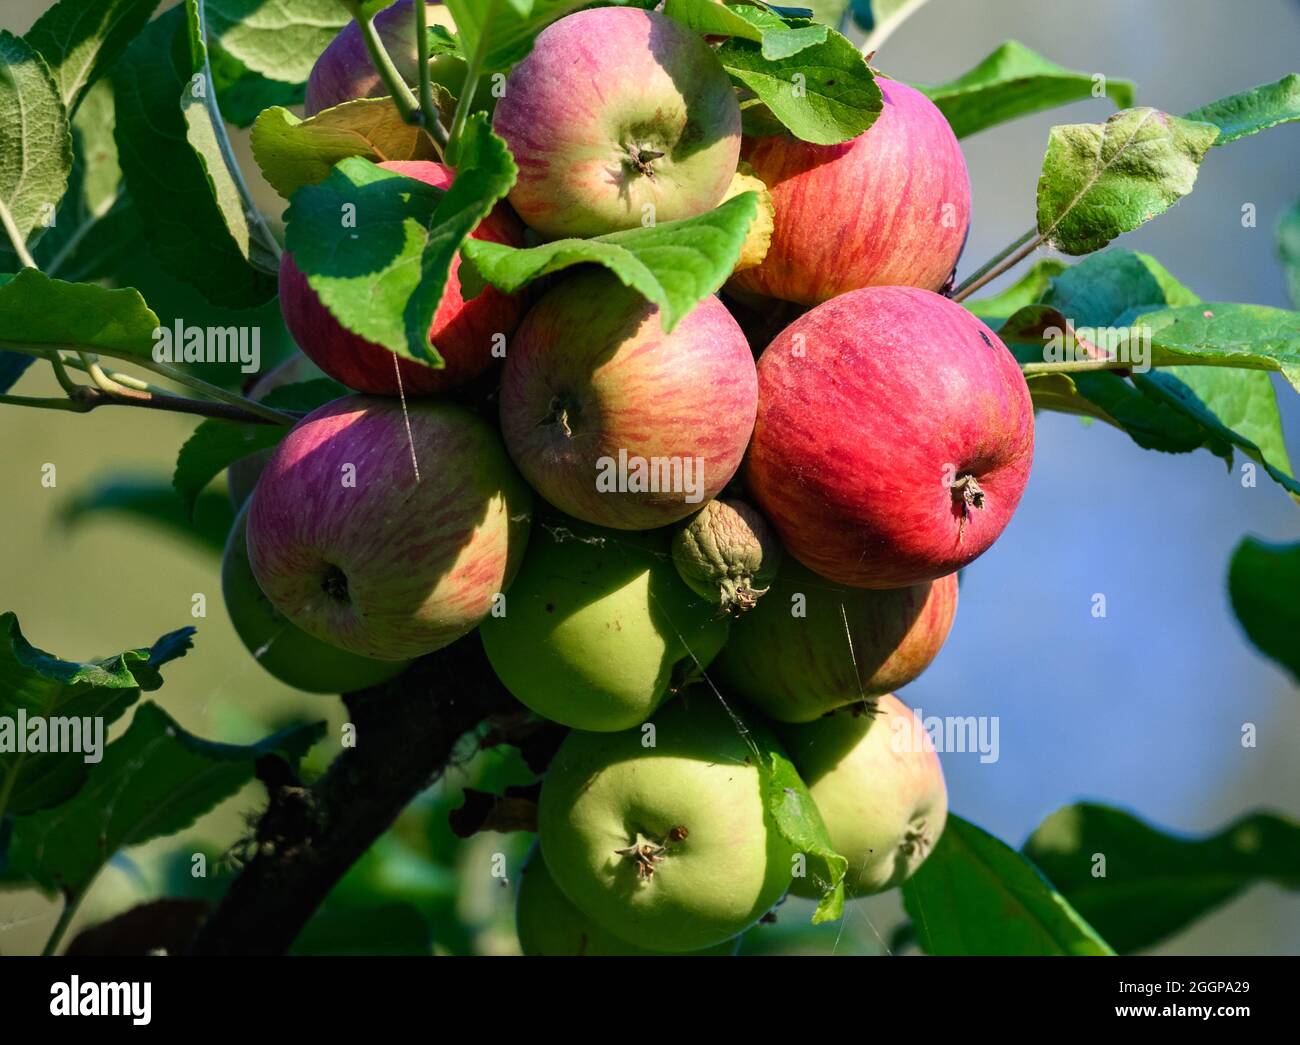 A cluster of red and green apples hanging from branch. Florence, Oregon, USA. Stock Photo